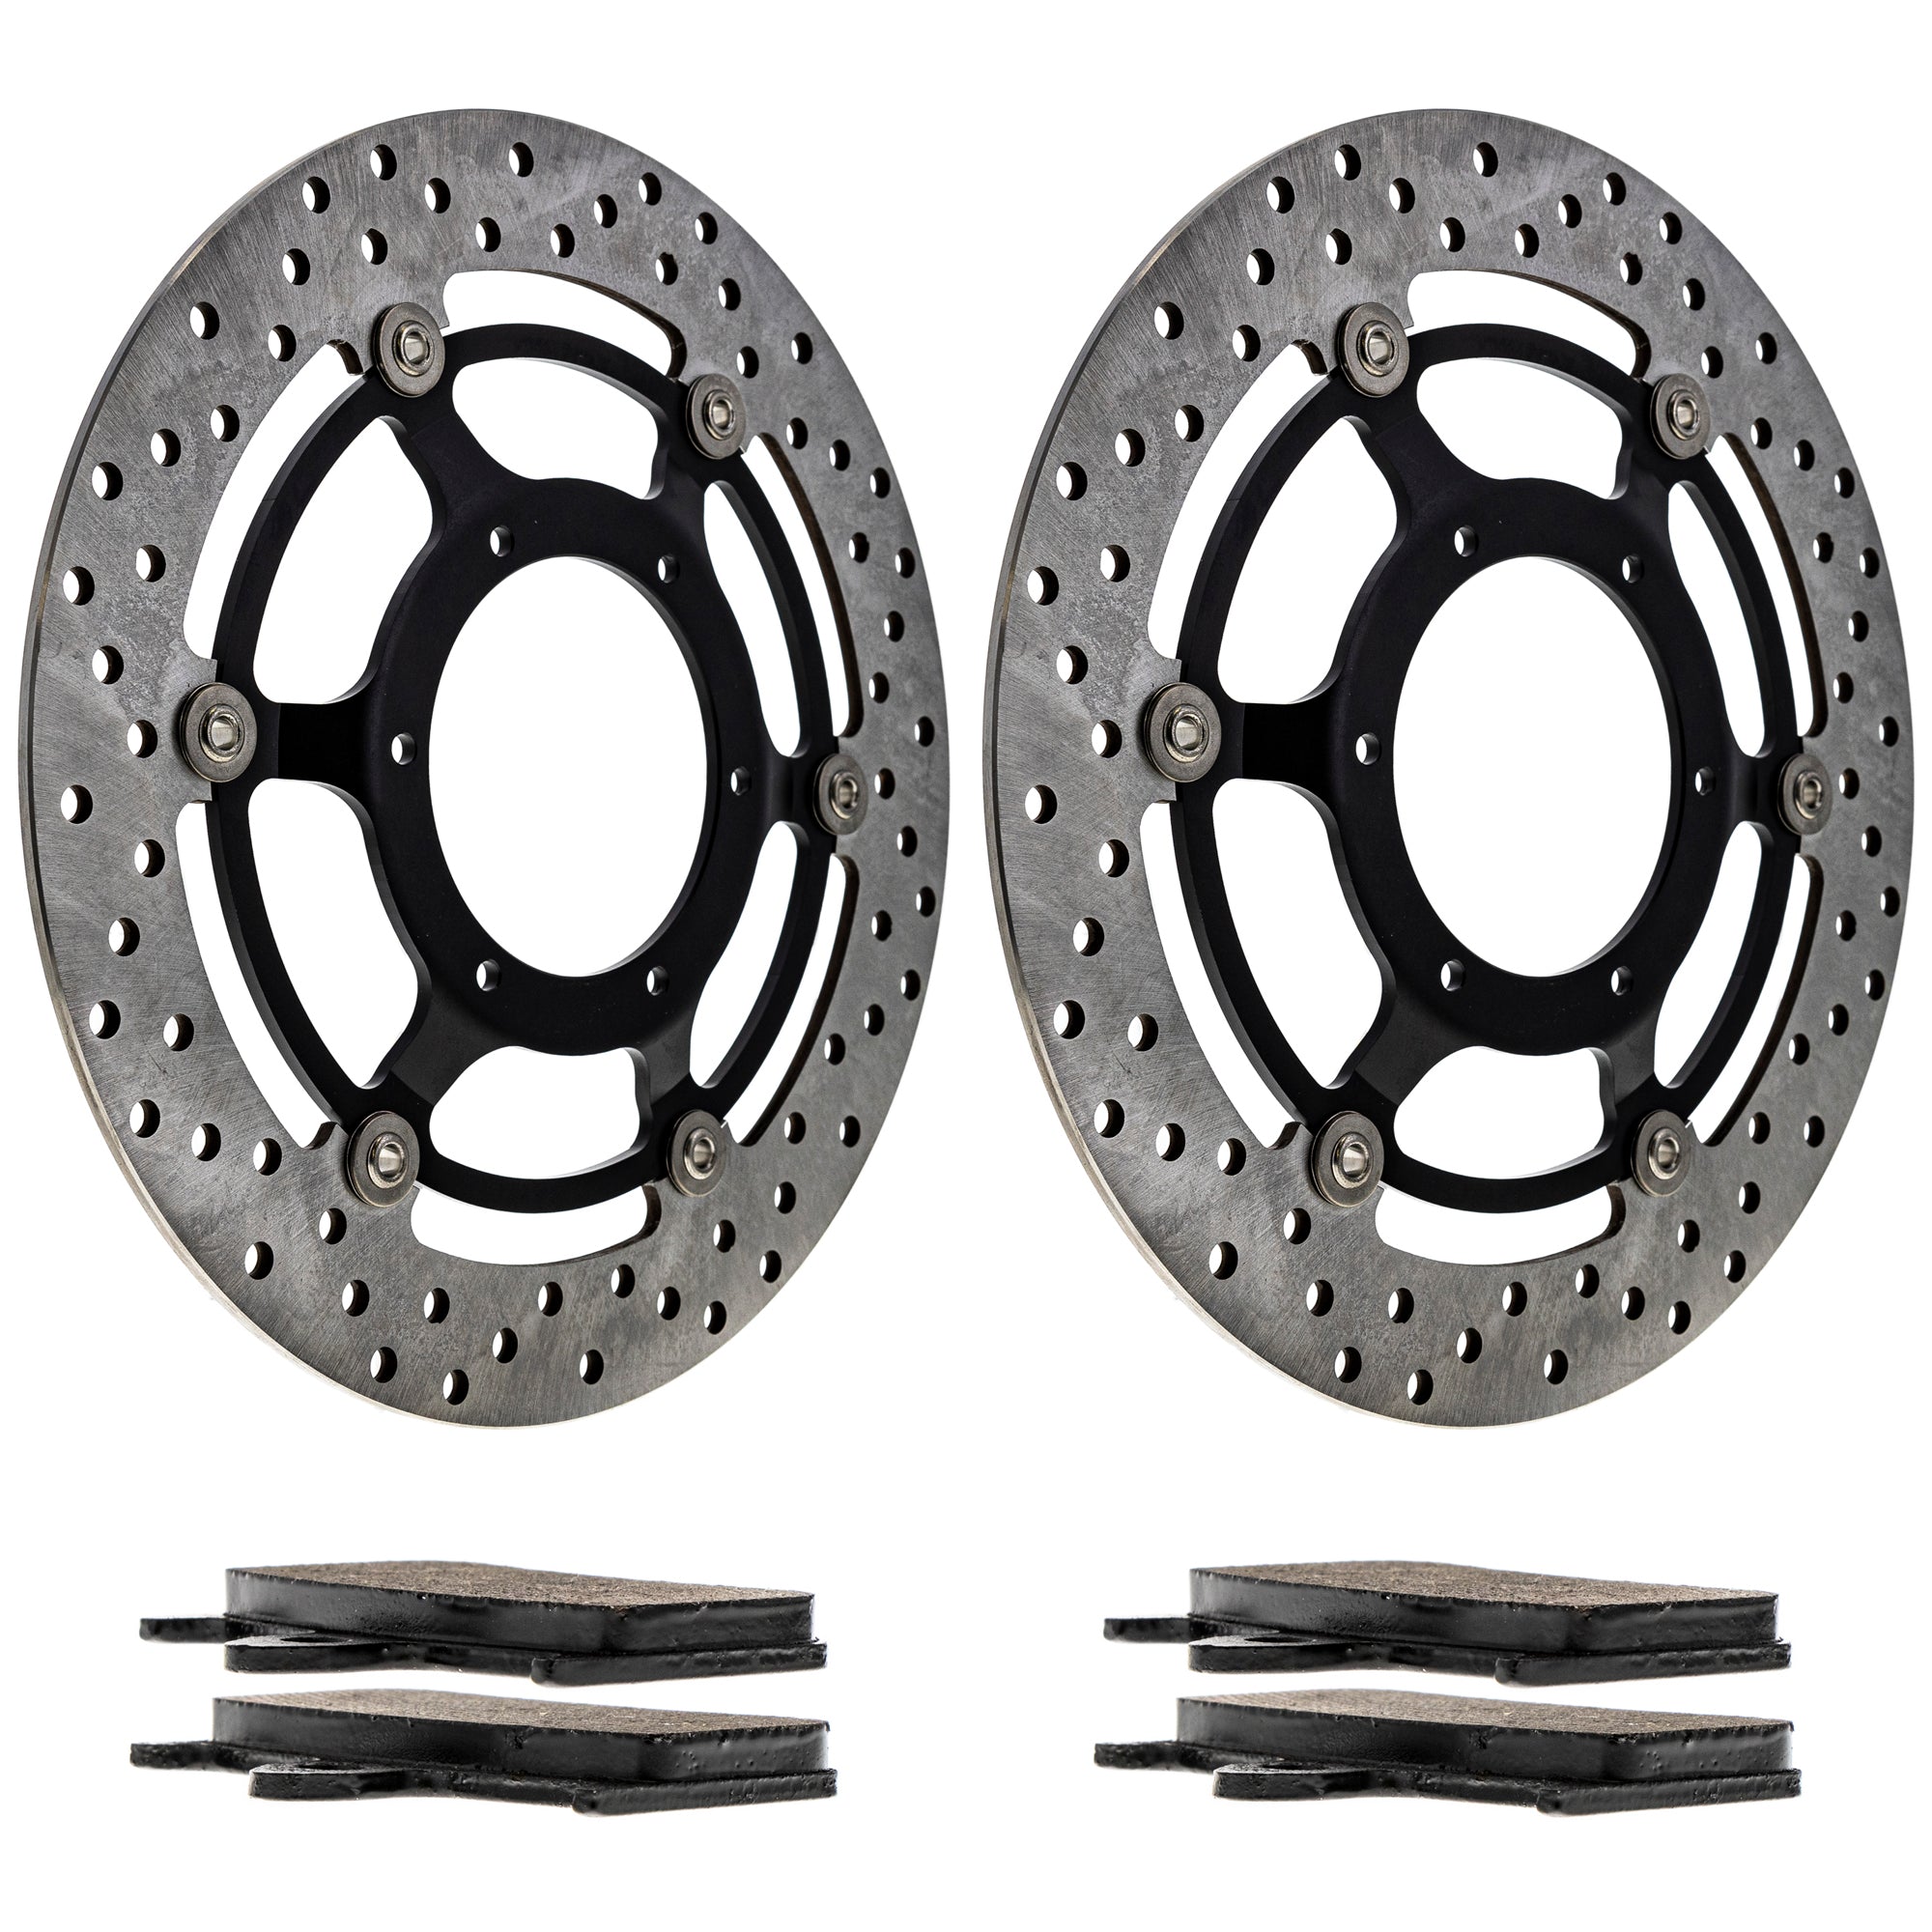 Front Brake Rotors and Pads Kit for zOTHER BMW 919 06455-MCZ-016 06455-MCZ-006 NICHE MK1006768